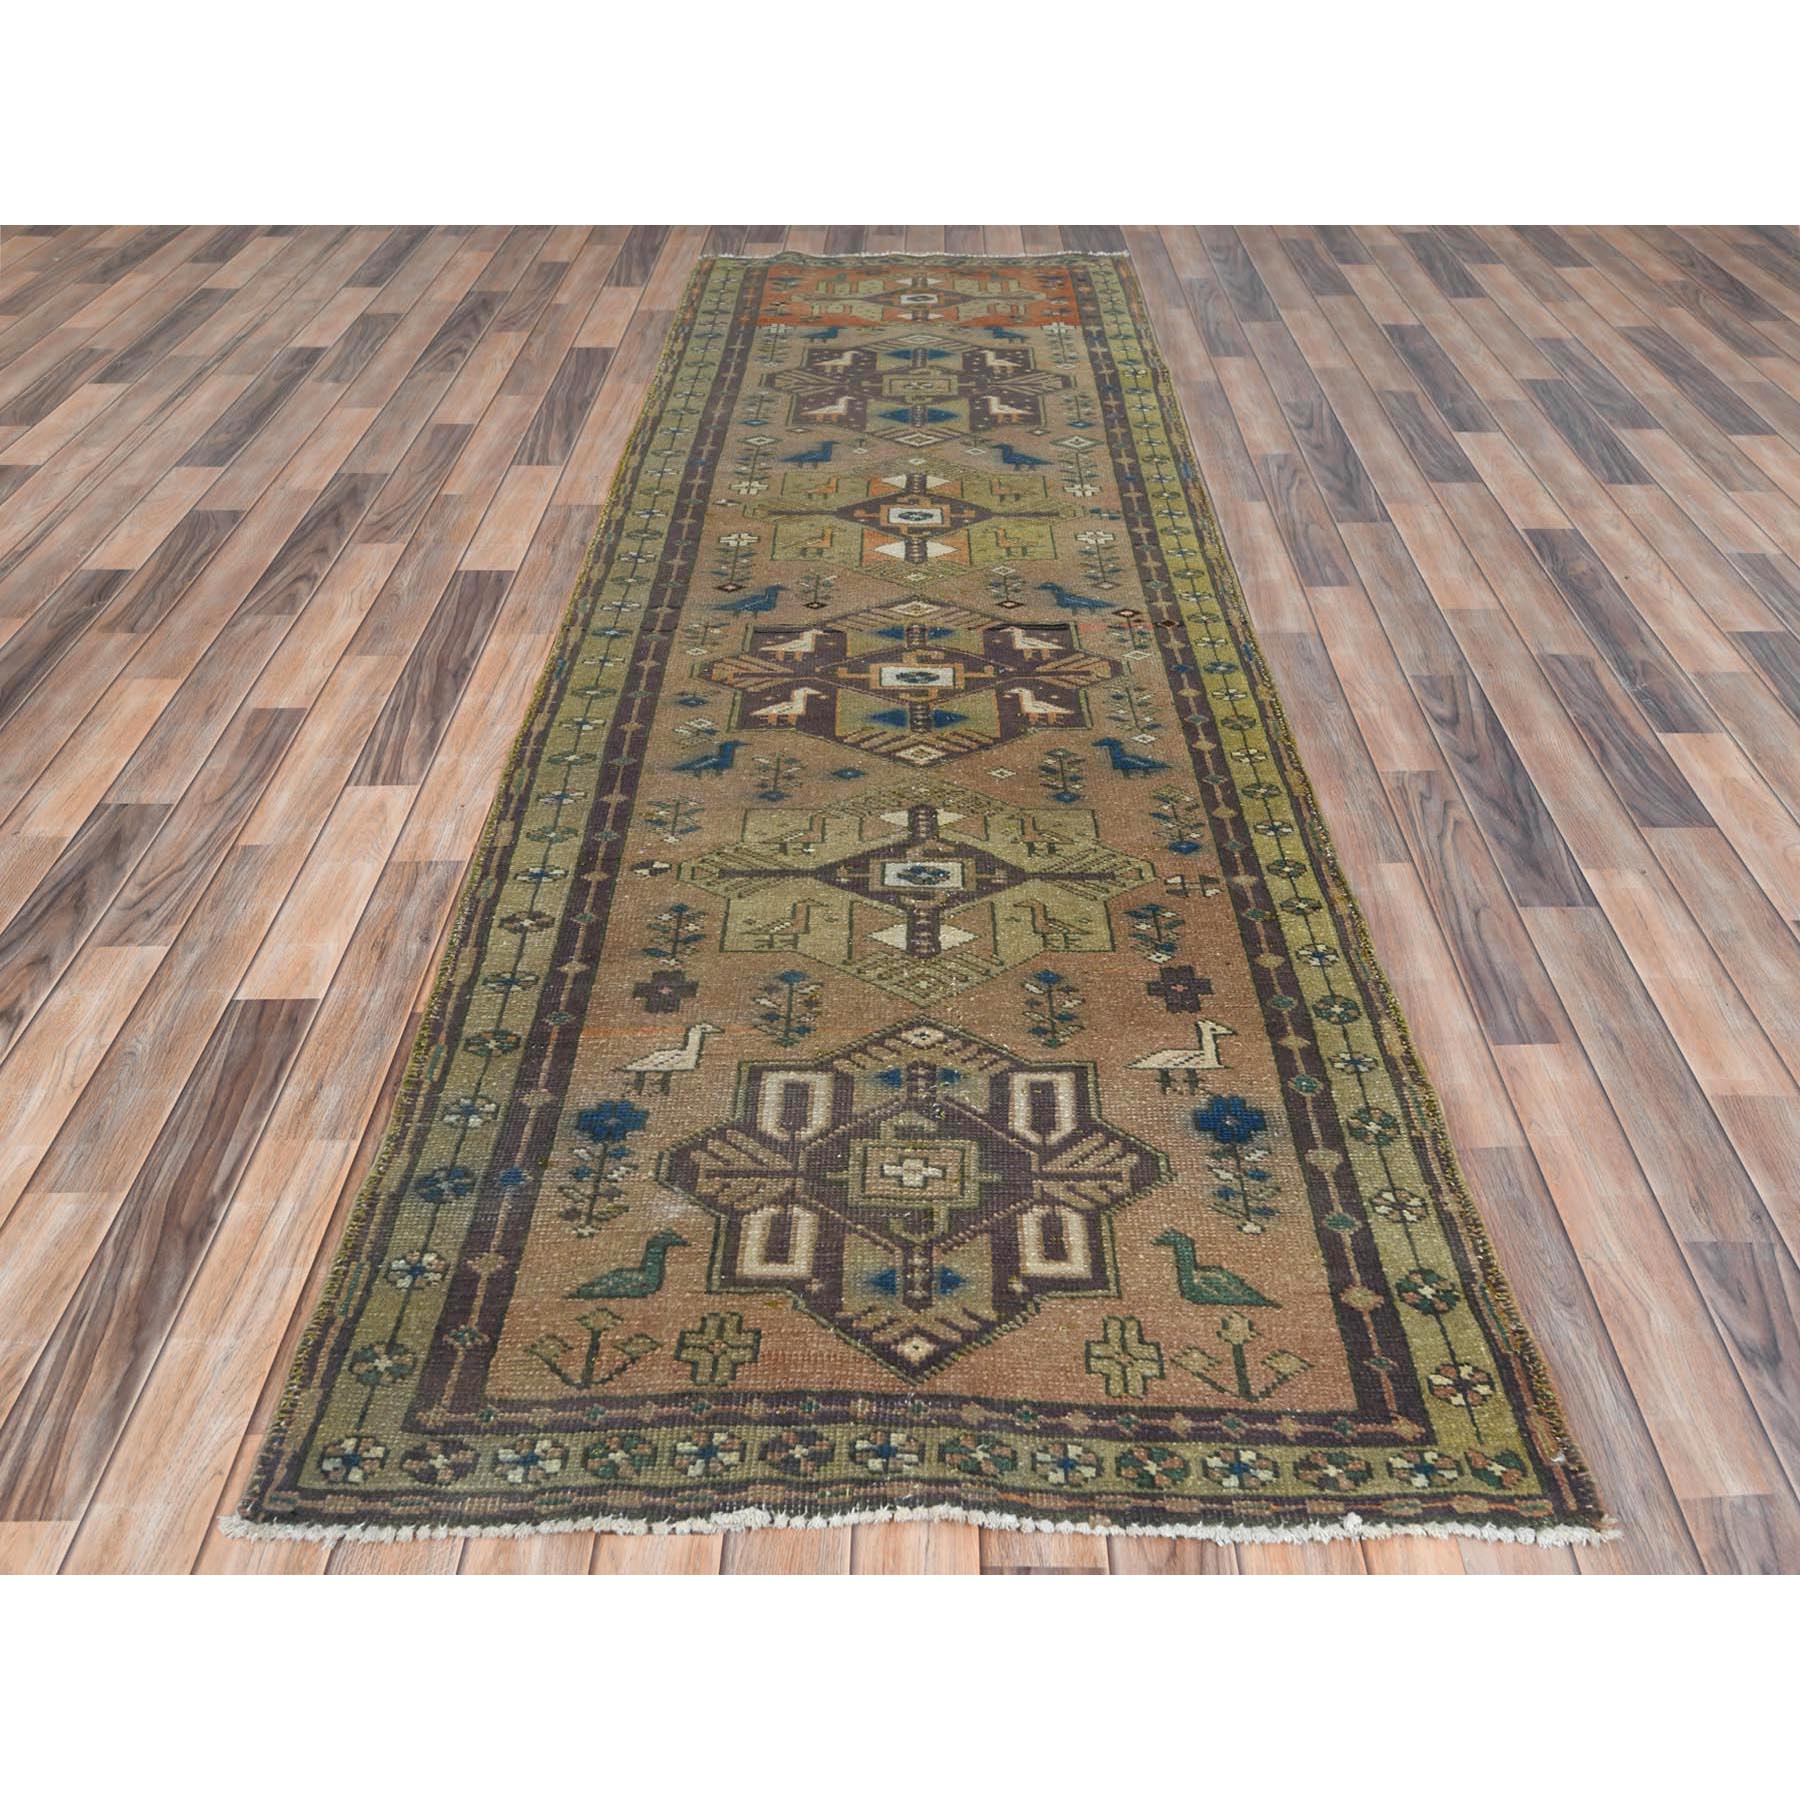 3'4"x10'3" Walnut Brown, Northwest Persian Wide Runner with Small Bird Figurines, Abrash, Hand Woven, Pure Wool, Sheared Low, Distressed Look Oriental Rug 